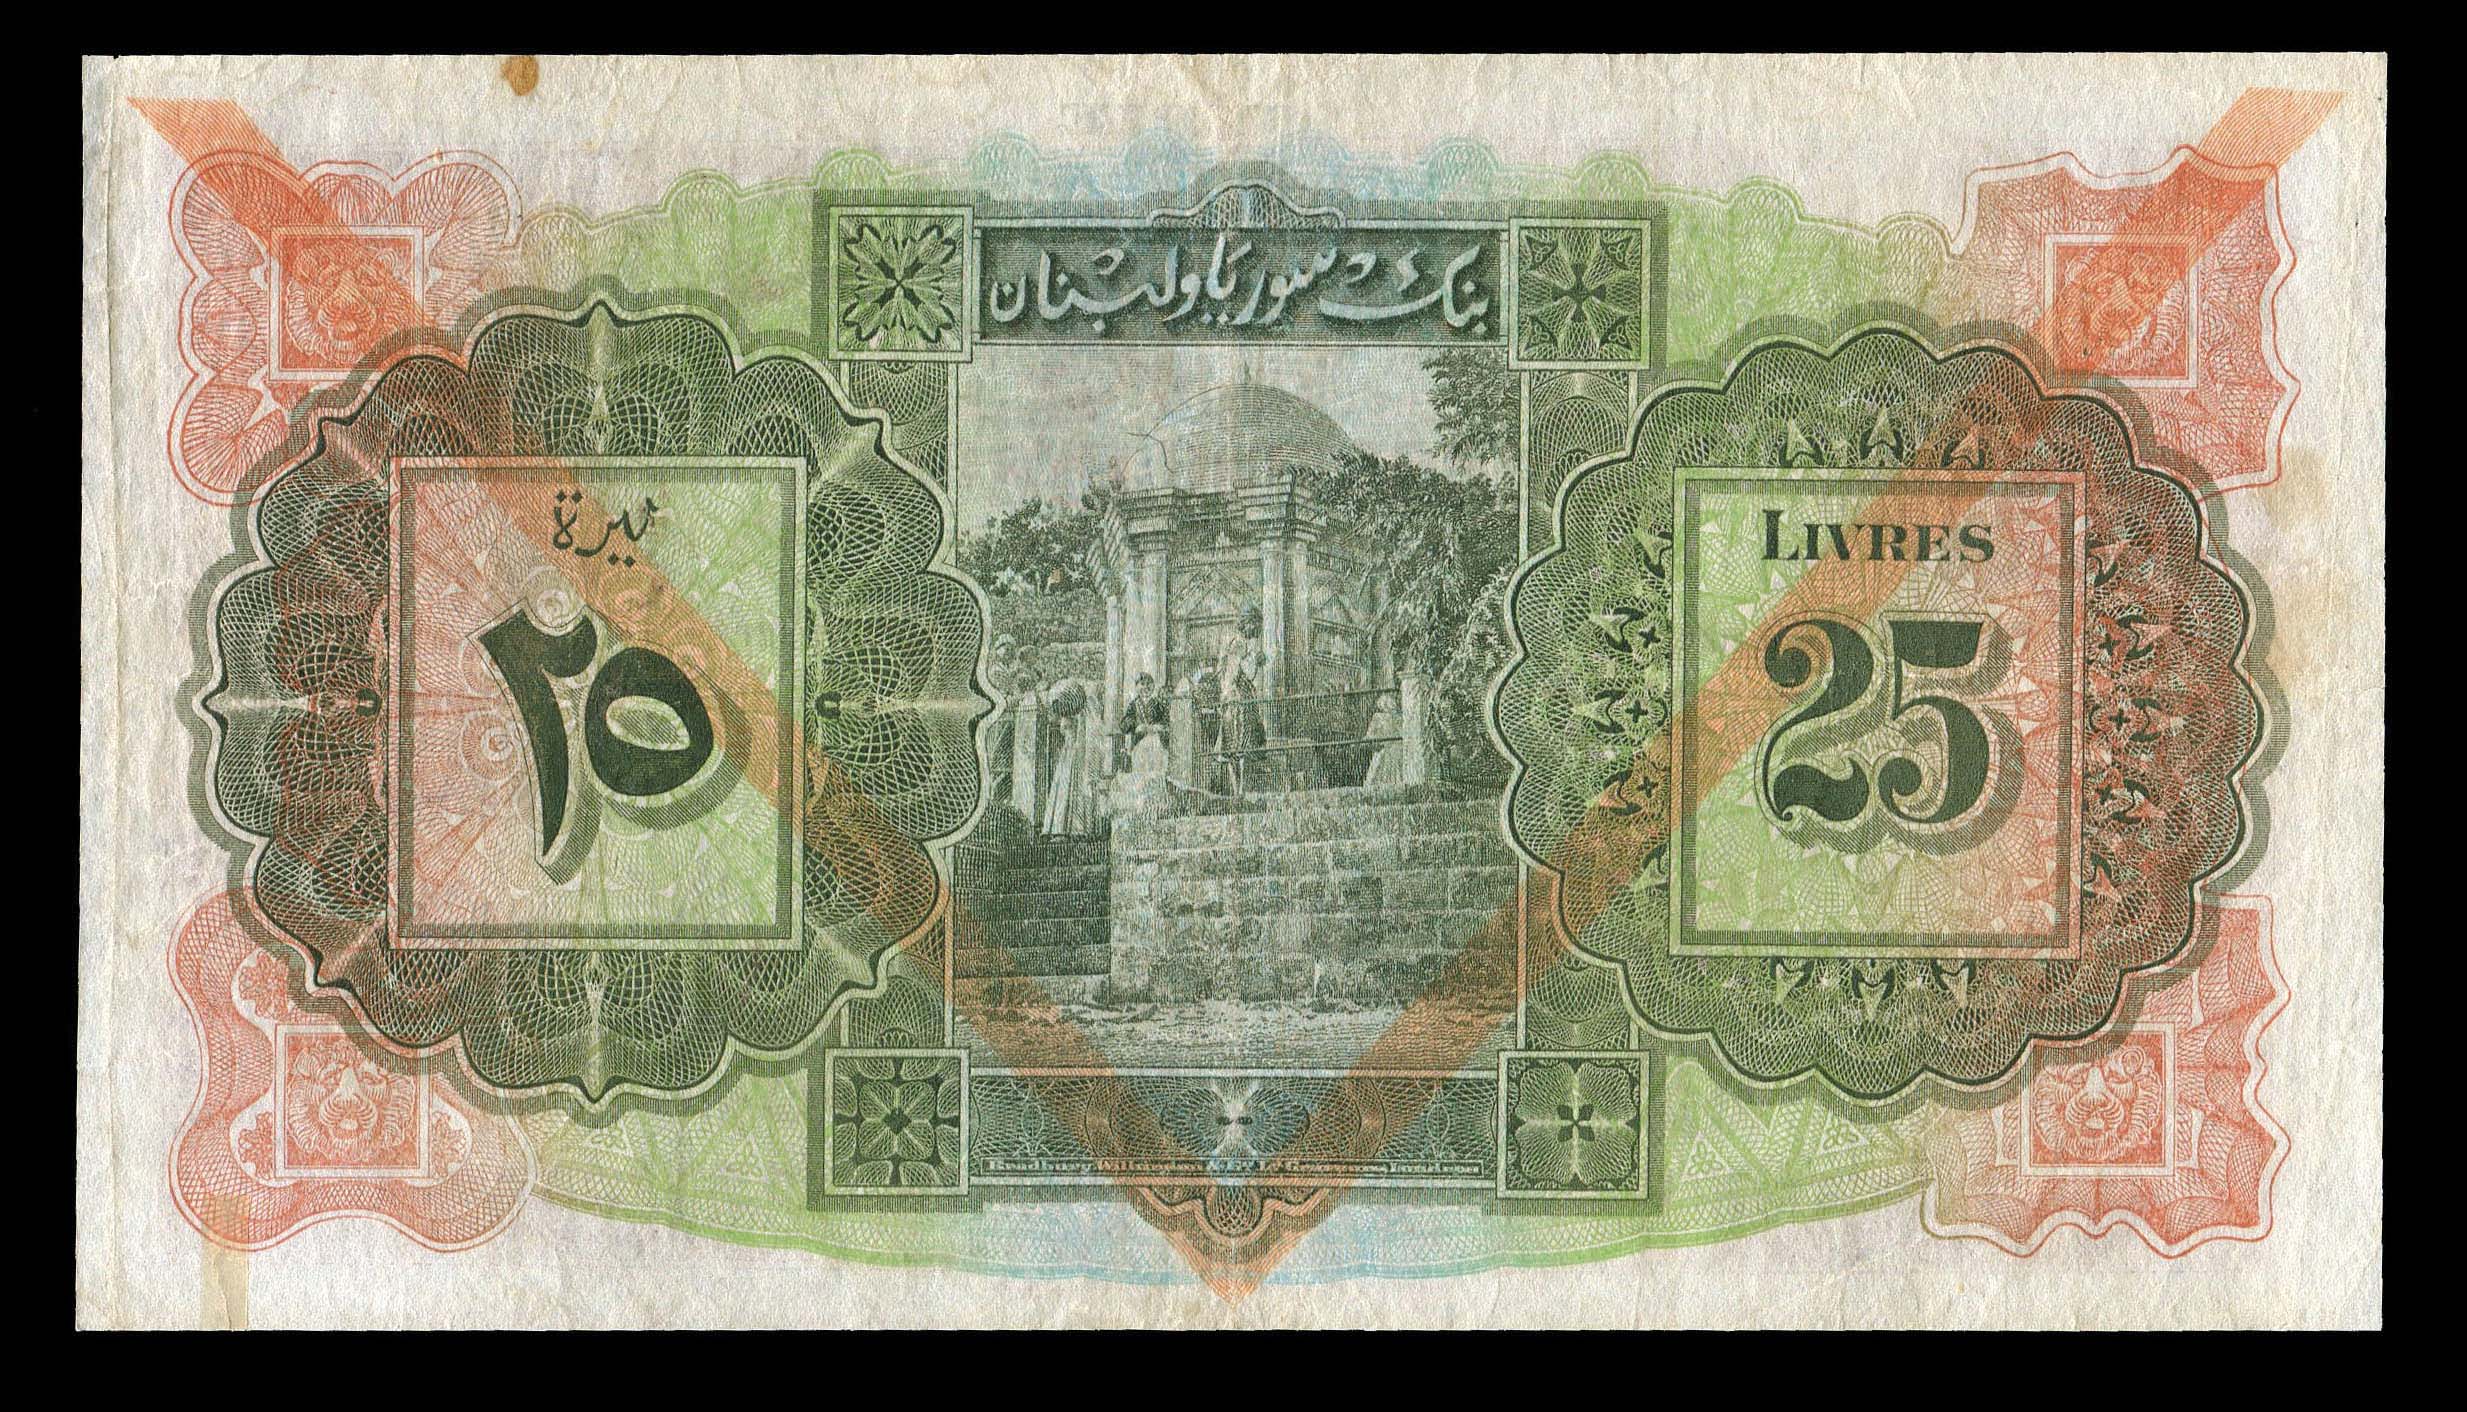 Syria, Banque de Syrie et du Liban, 1 September 1939 Issue, 25 livres, with type C overprint in - Image 2 of 2